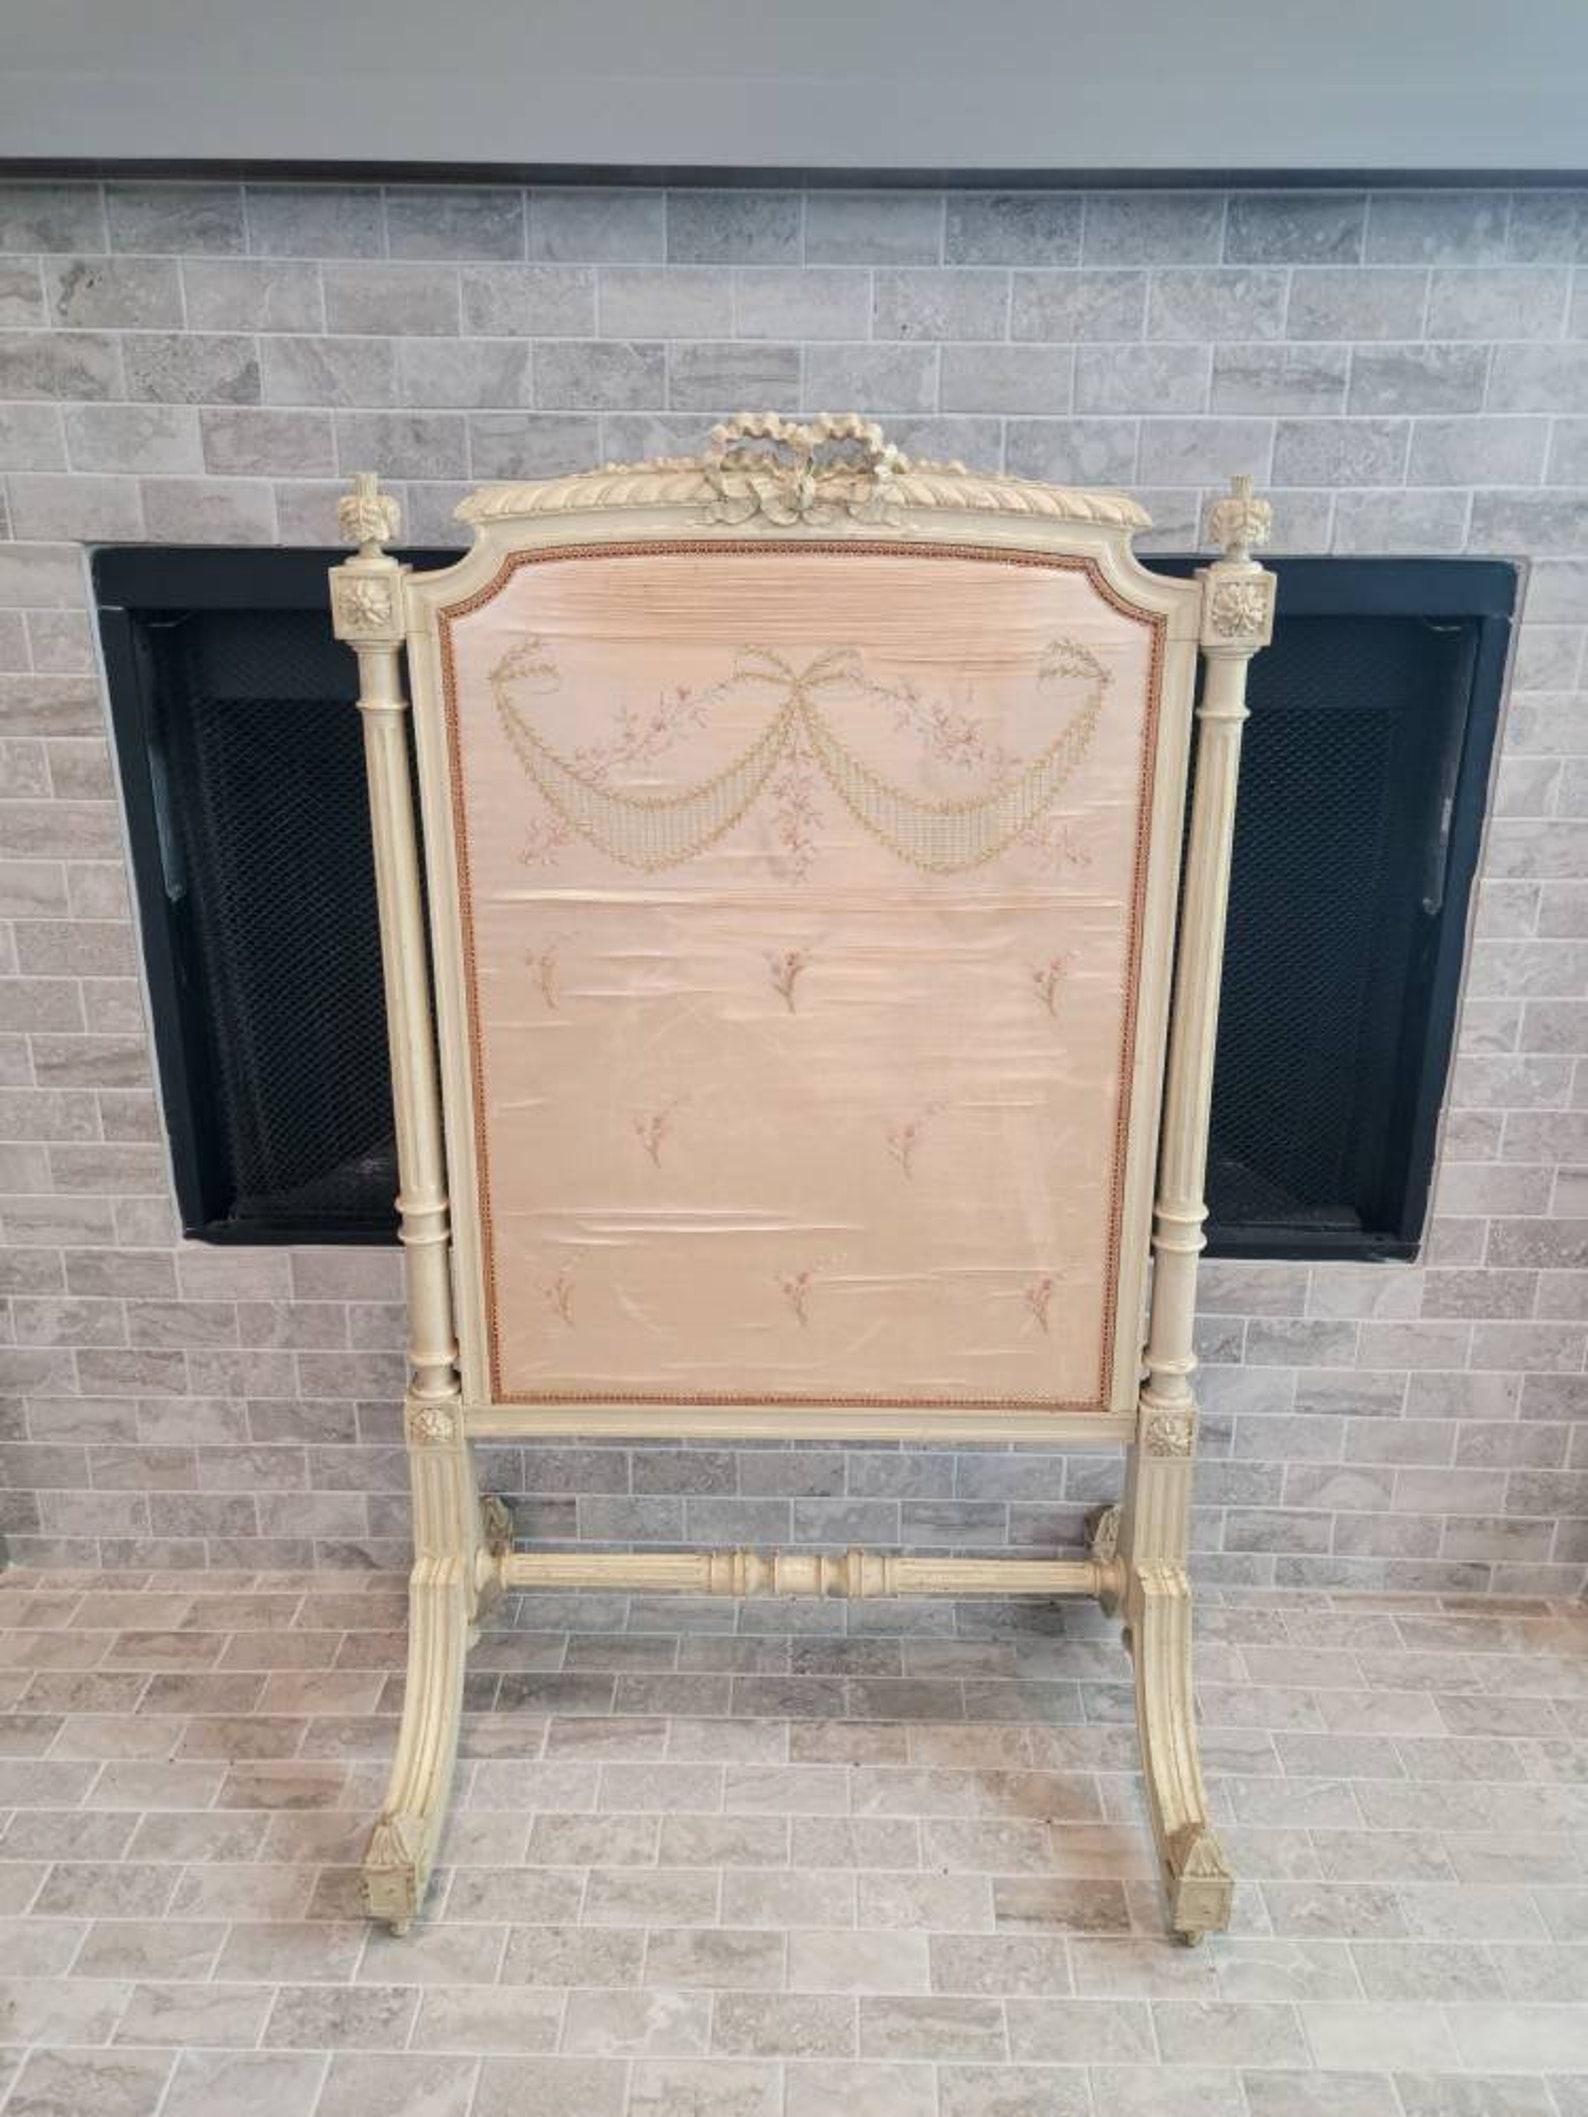 A scarce period Louis XVI hand carved wooden fire screen (Écran de Cheminée) in the manner of important Parisian menuisiers Georges Jacob (French, 1739-1814) retaining the original brocaded silk textile panel. circa 1780s

Born in France in the late